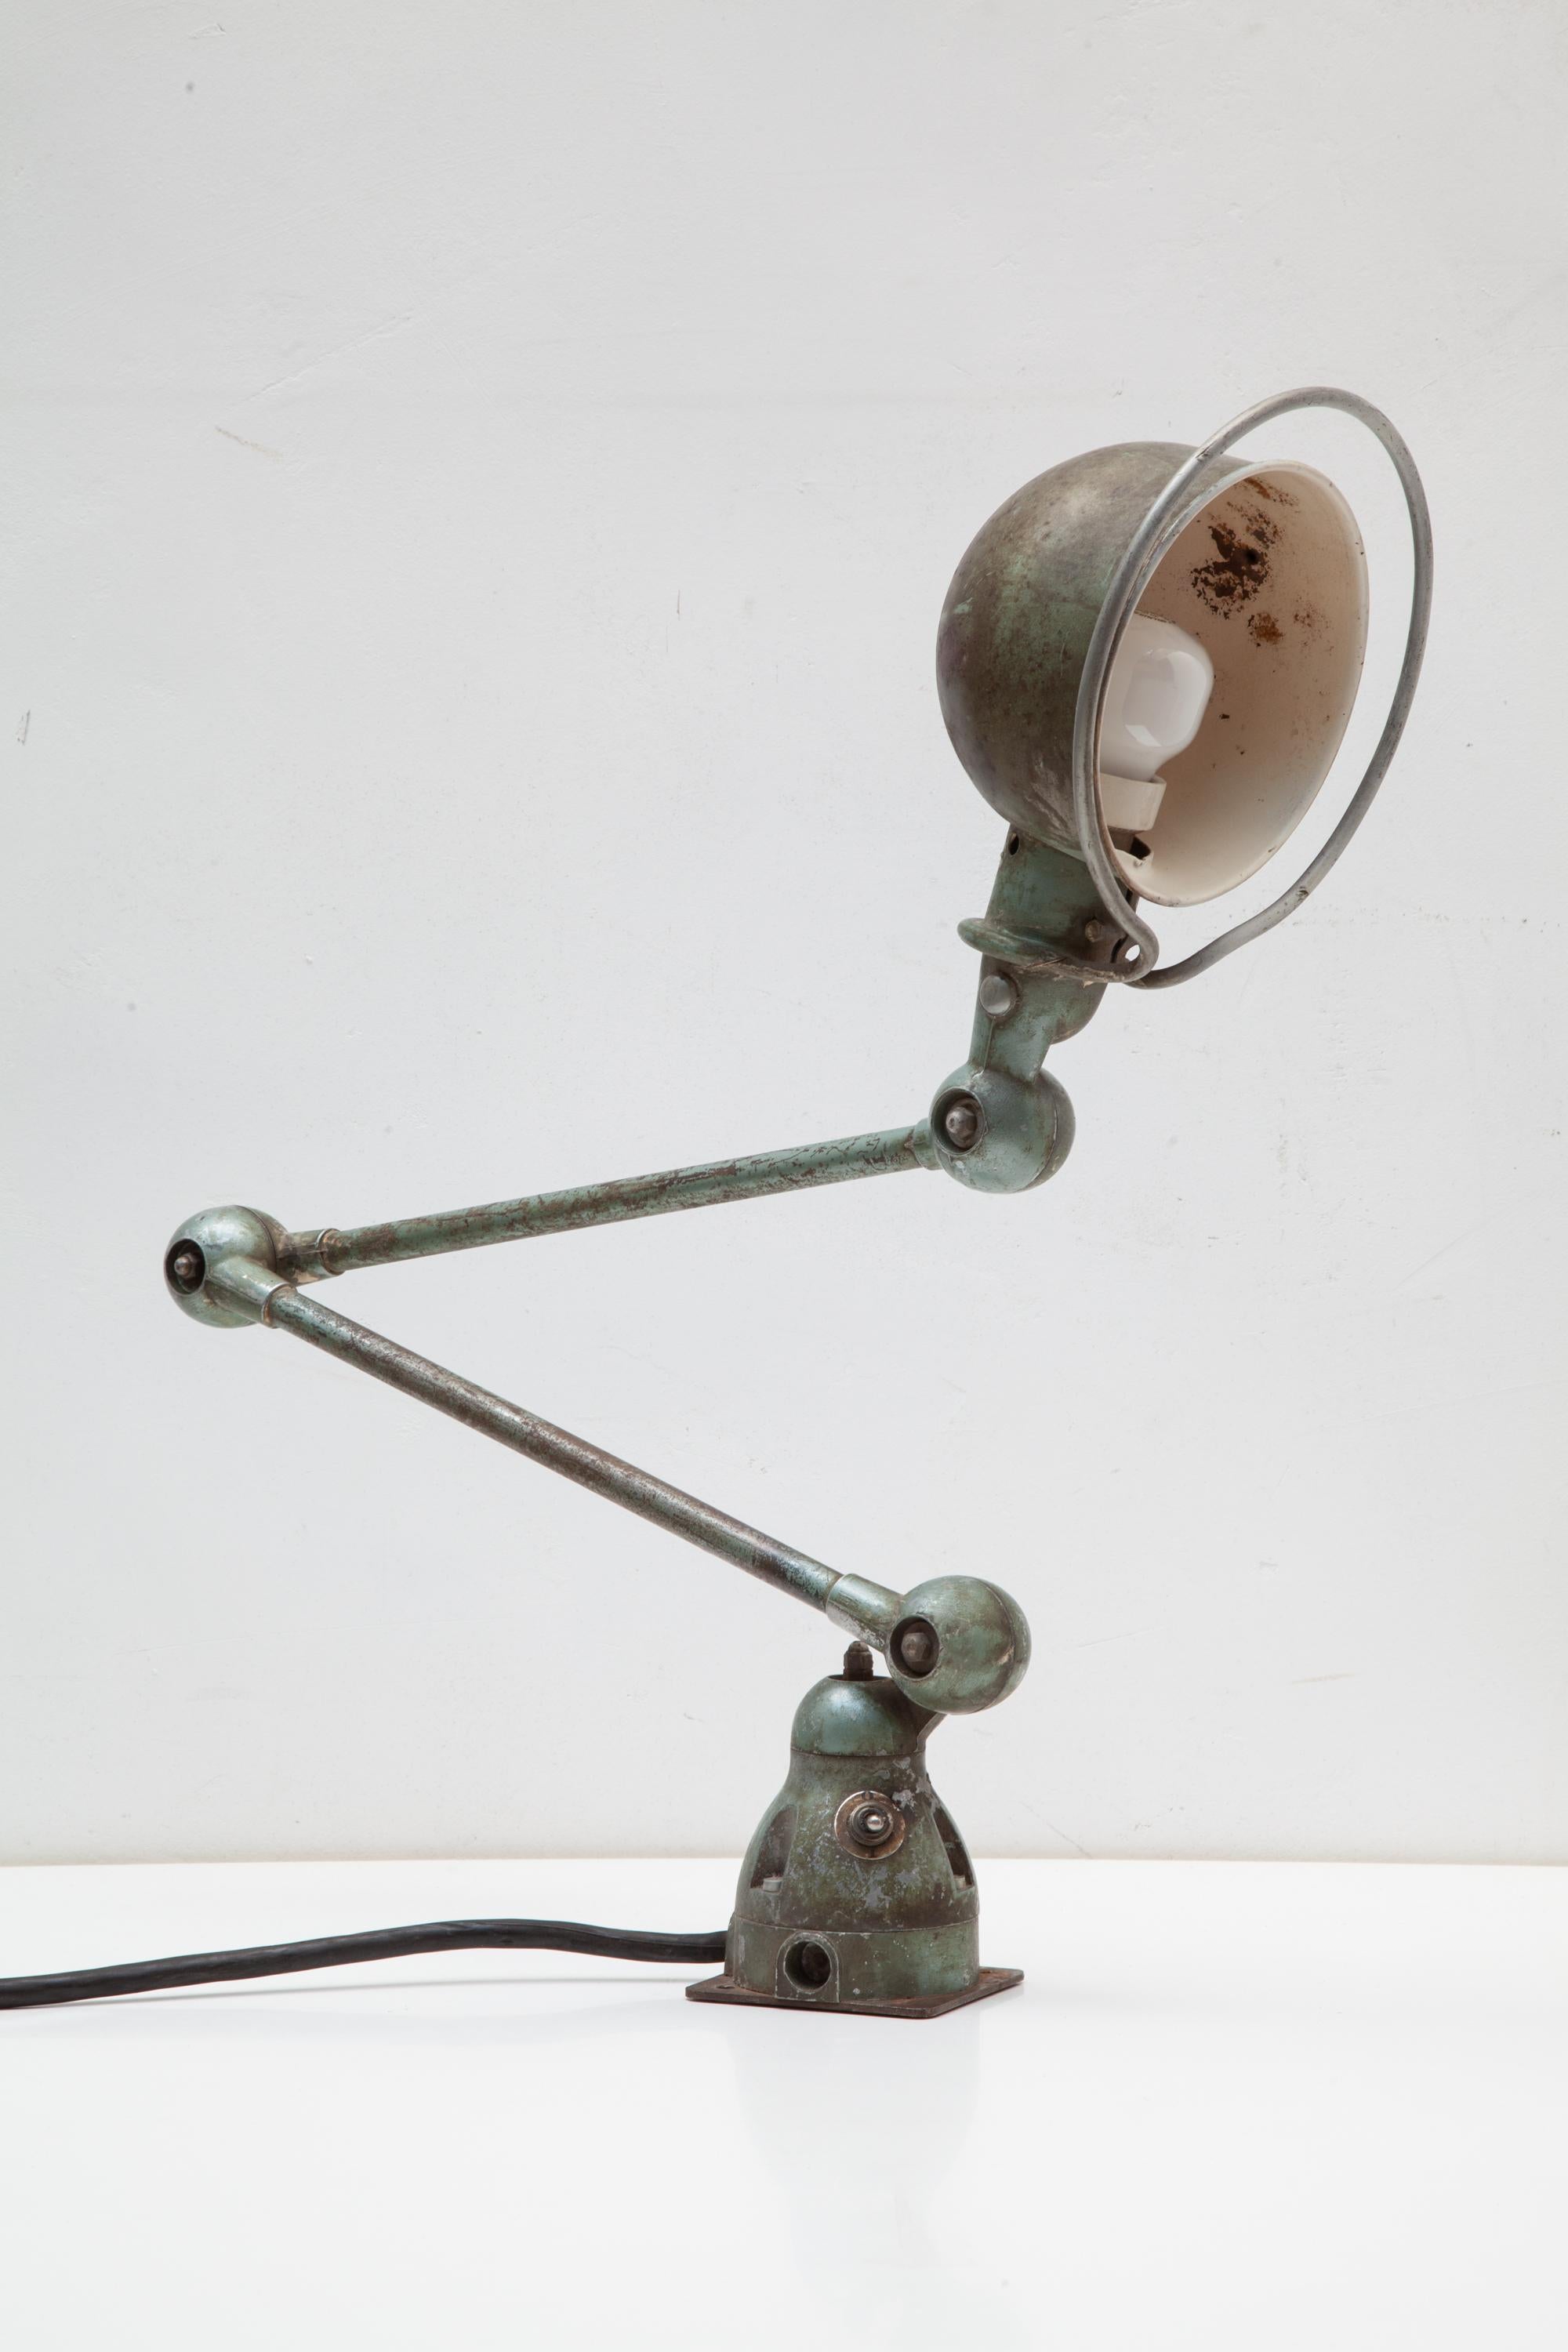 Jieldé is a French brand of industrial lamps made in 1950 by Jean-Louis Domecq (1920-1983).Jean-Louis Domecq started with the design of a special adjustable lamp.
This two-arms lamp with a nice vintage patina allows for many articulations also can